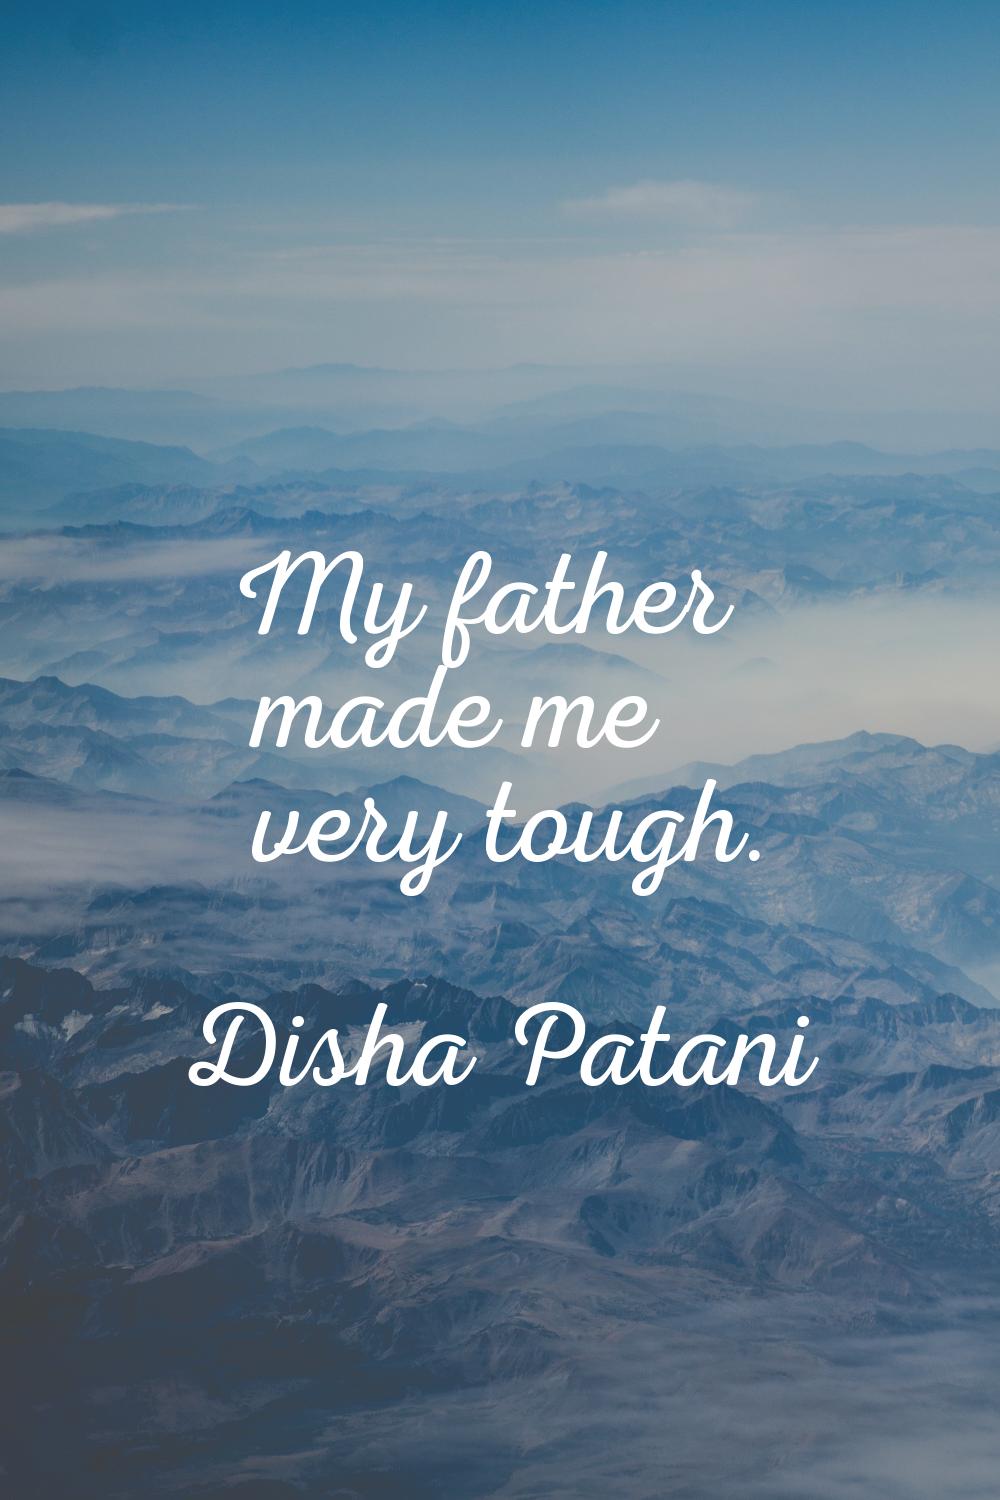 My father made me very tough.